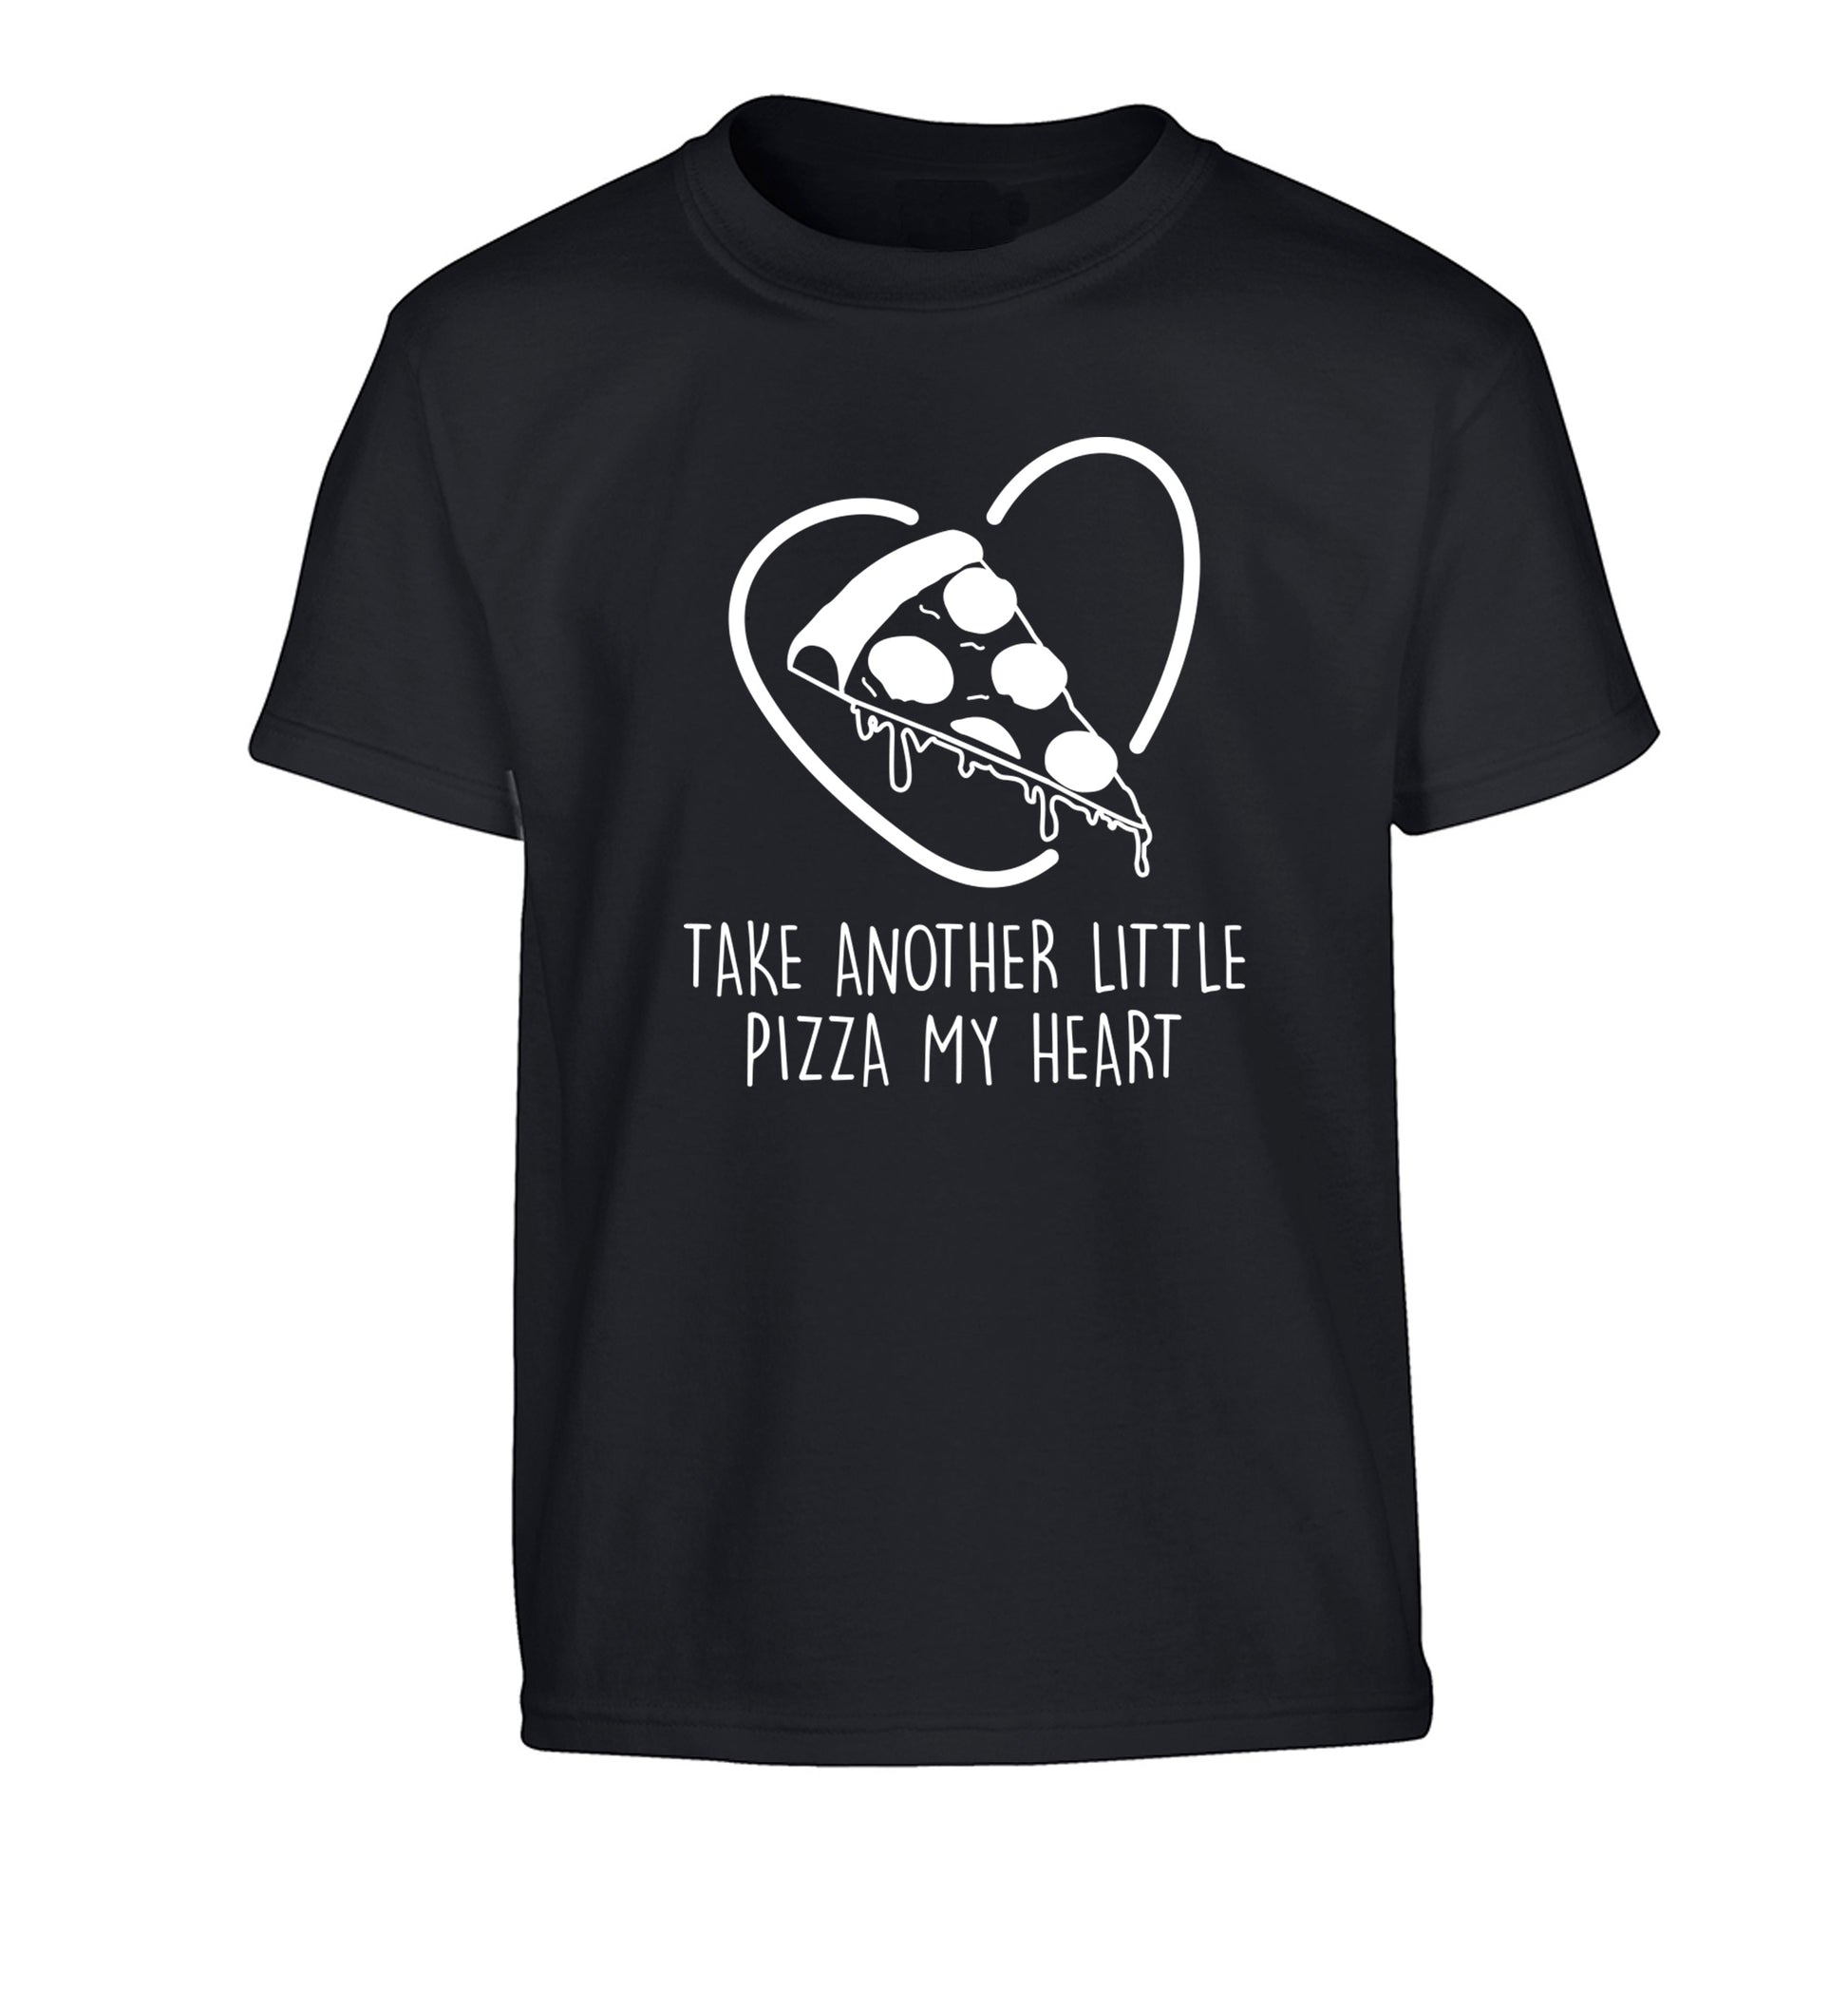 Take another little pizza my heart Children's black Tshirt 12-13 Years